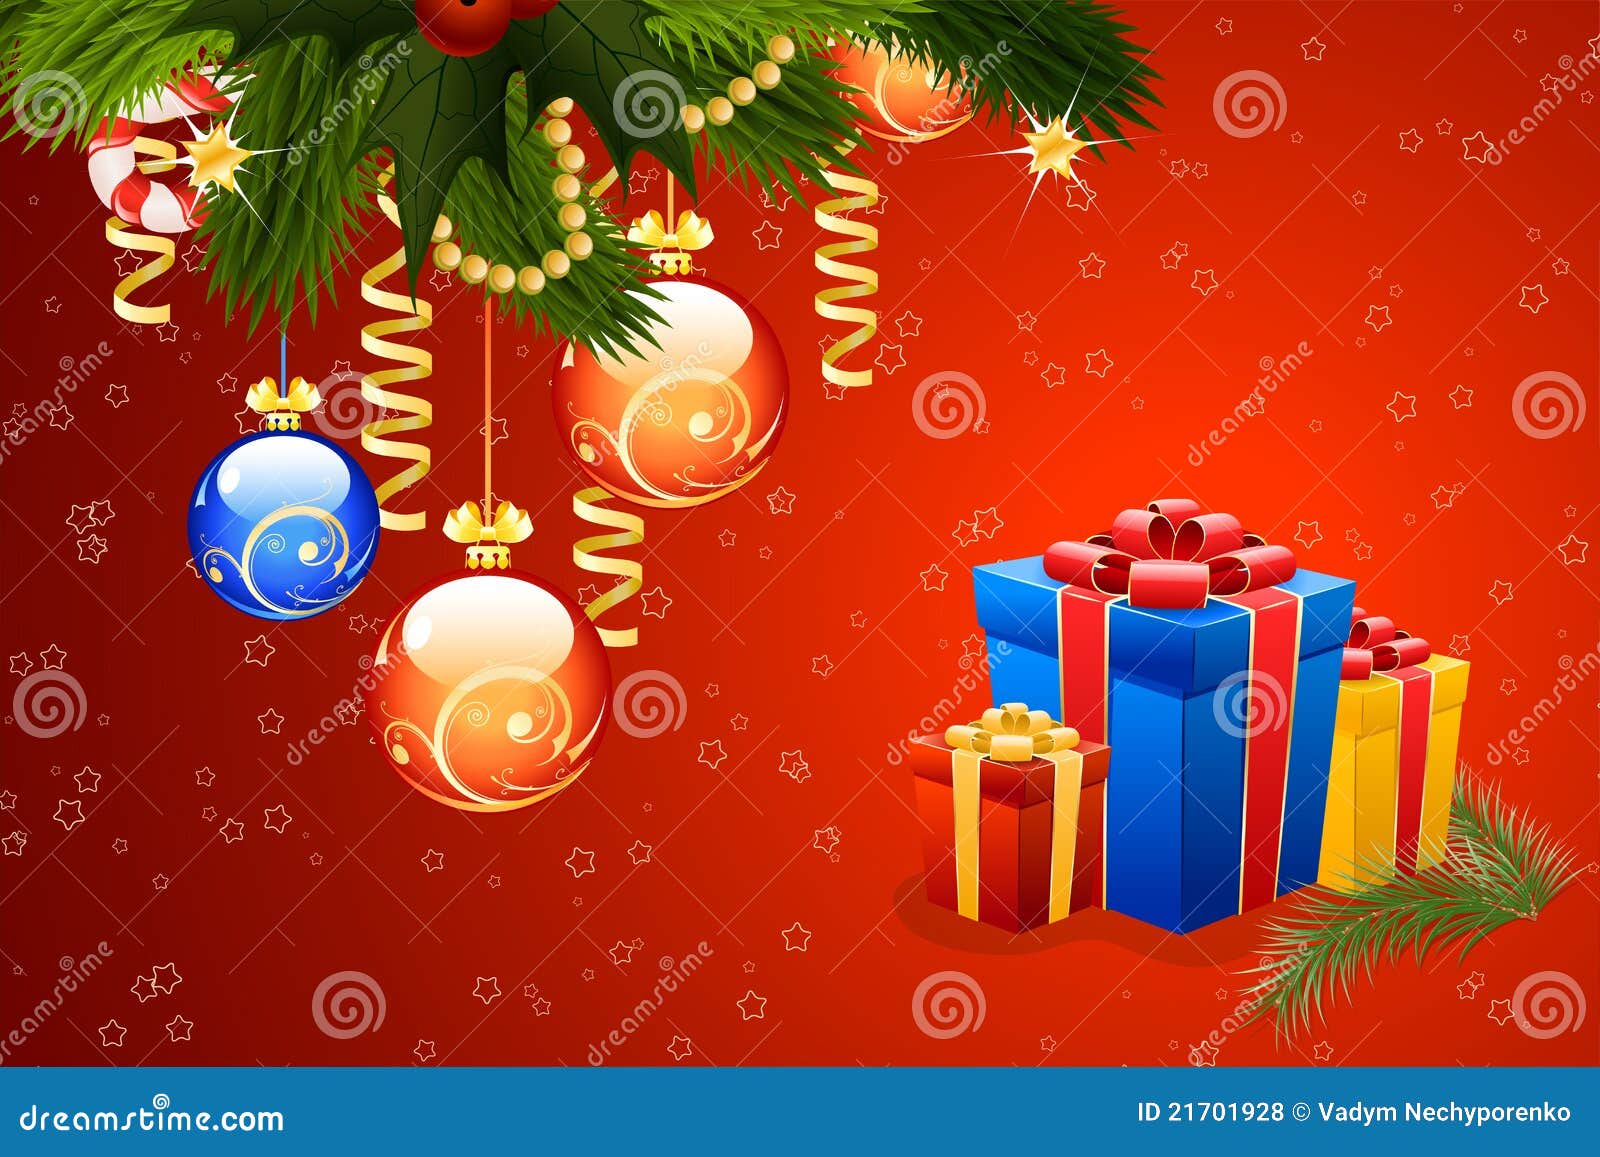 Microsoft Word Christmas Card Template from thumbs.dreamstime.com